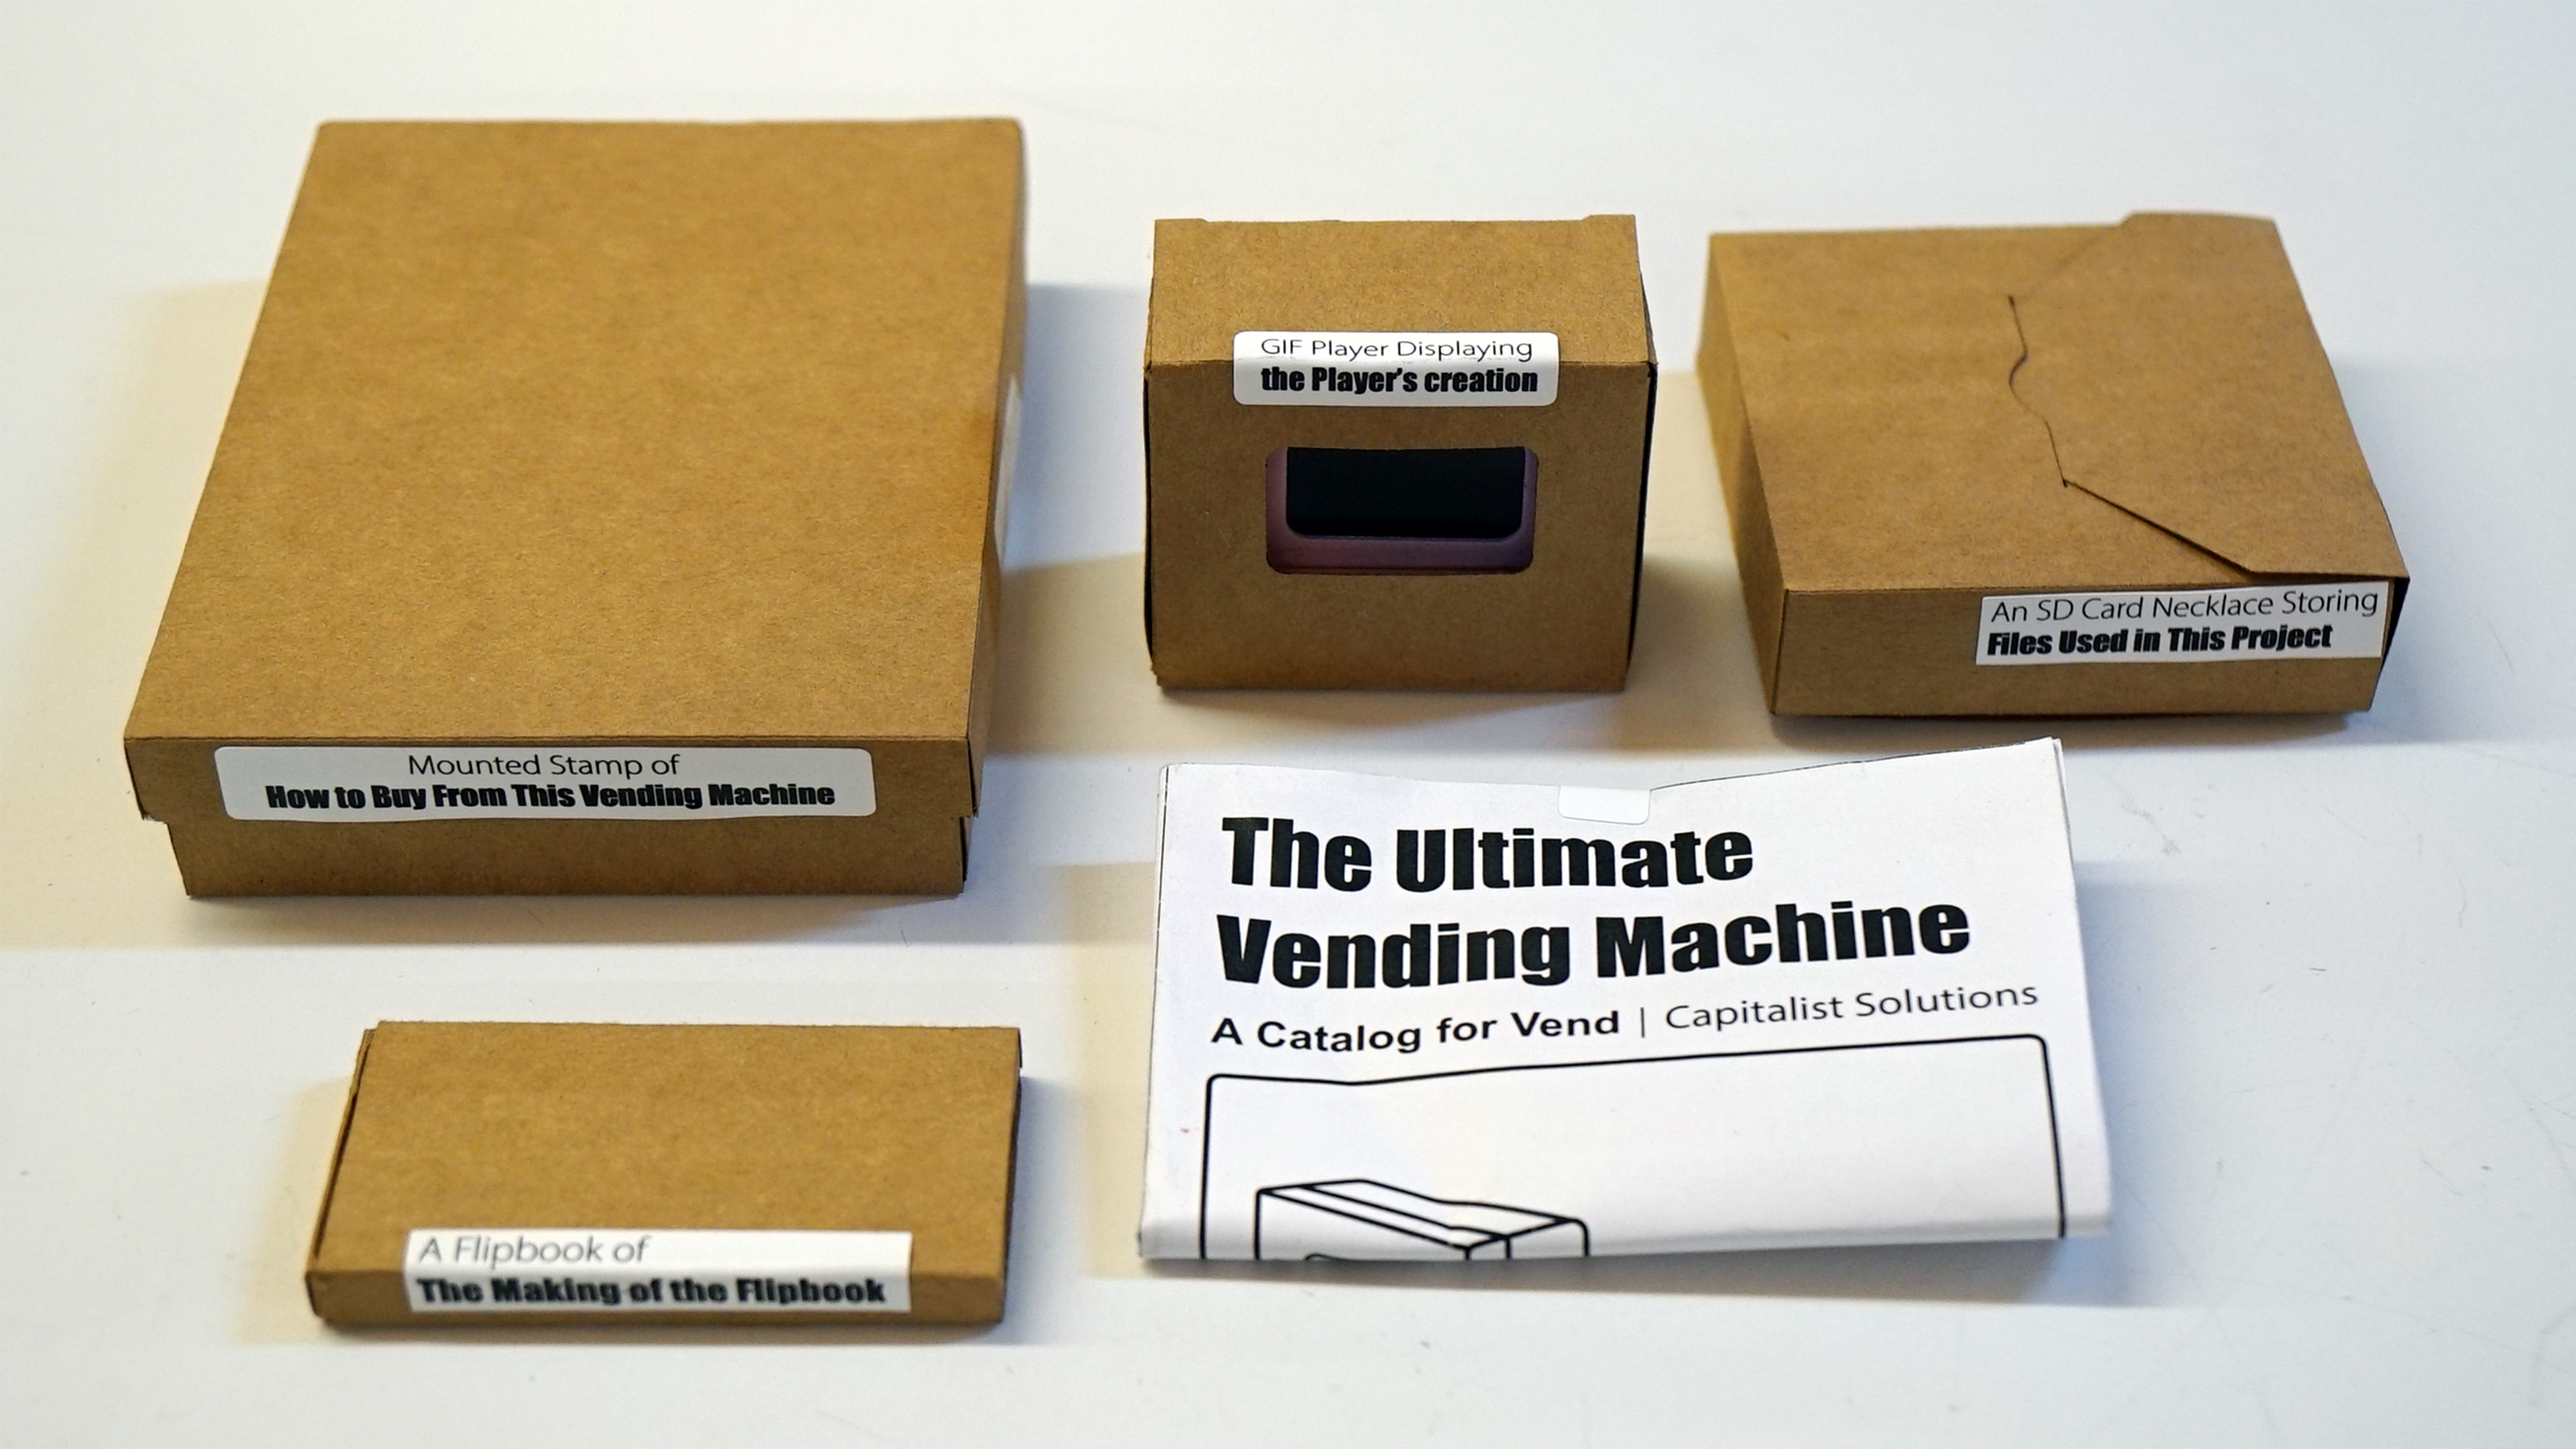 The 5 products of the Ultimate Vending Machine displaying on a table. They are labeled with their name. They are (from left to right, top to bottom): The mounted stamp of how to buy from the vending machine, the Mini GIF player playing the player's creation, The SD Card necklace that contains all the files used, the flipbook of the making of the flipbook, The Ultimate Vending Machine Catalog Volume One.